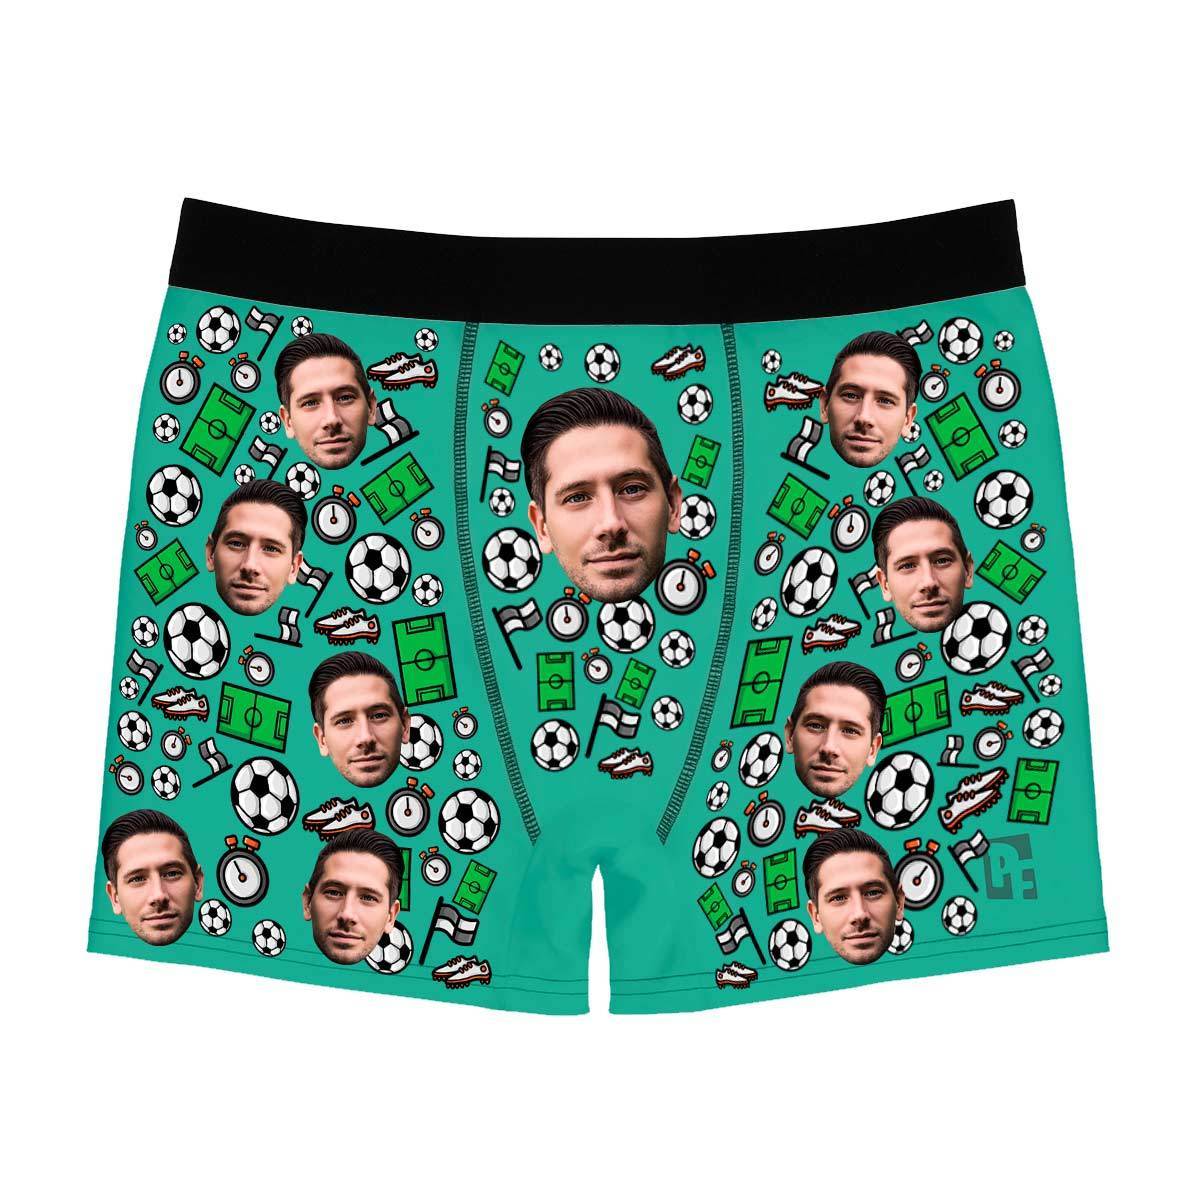 Mint Football men's boxer briefs personalized with photo printed on them